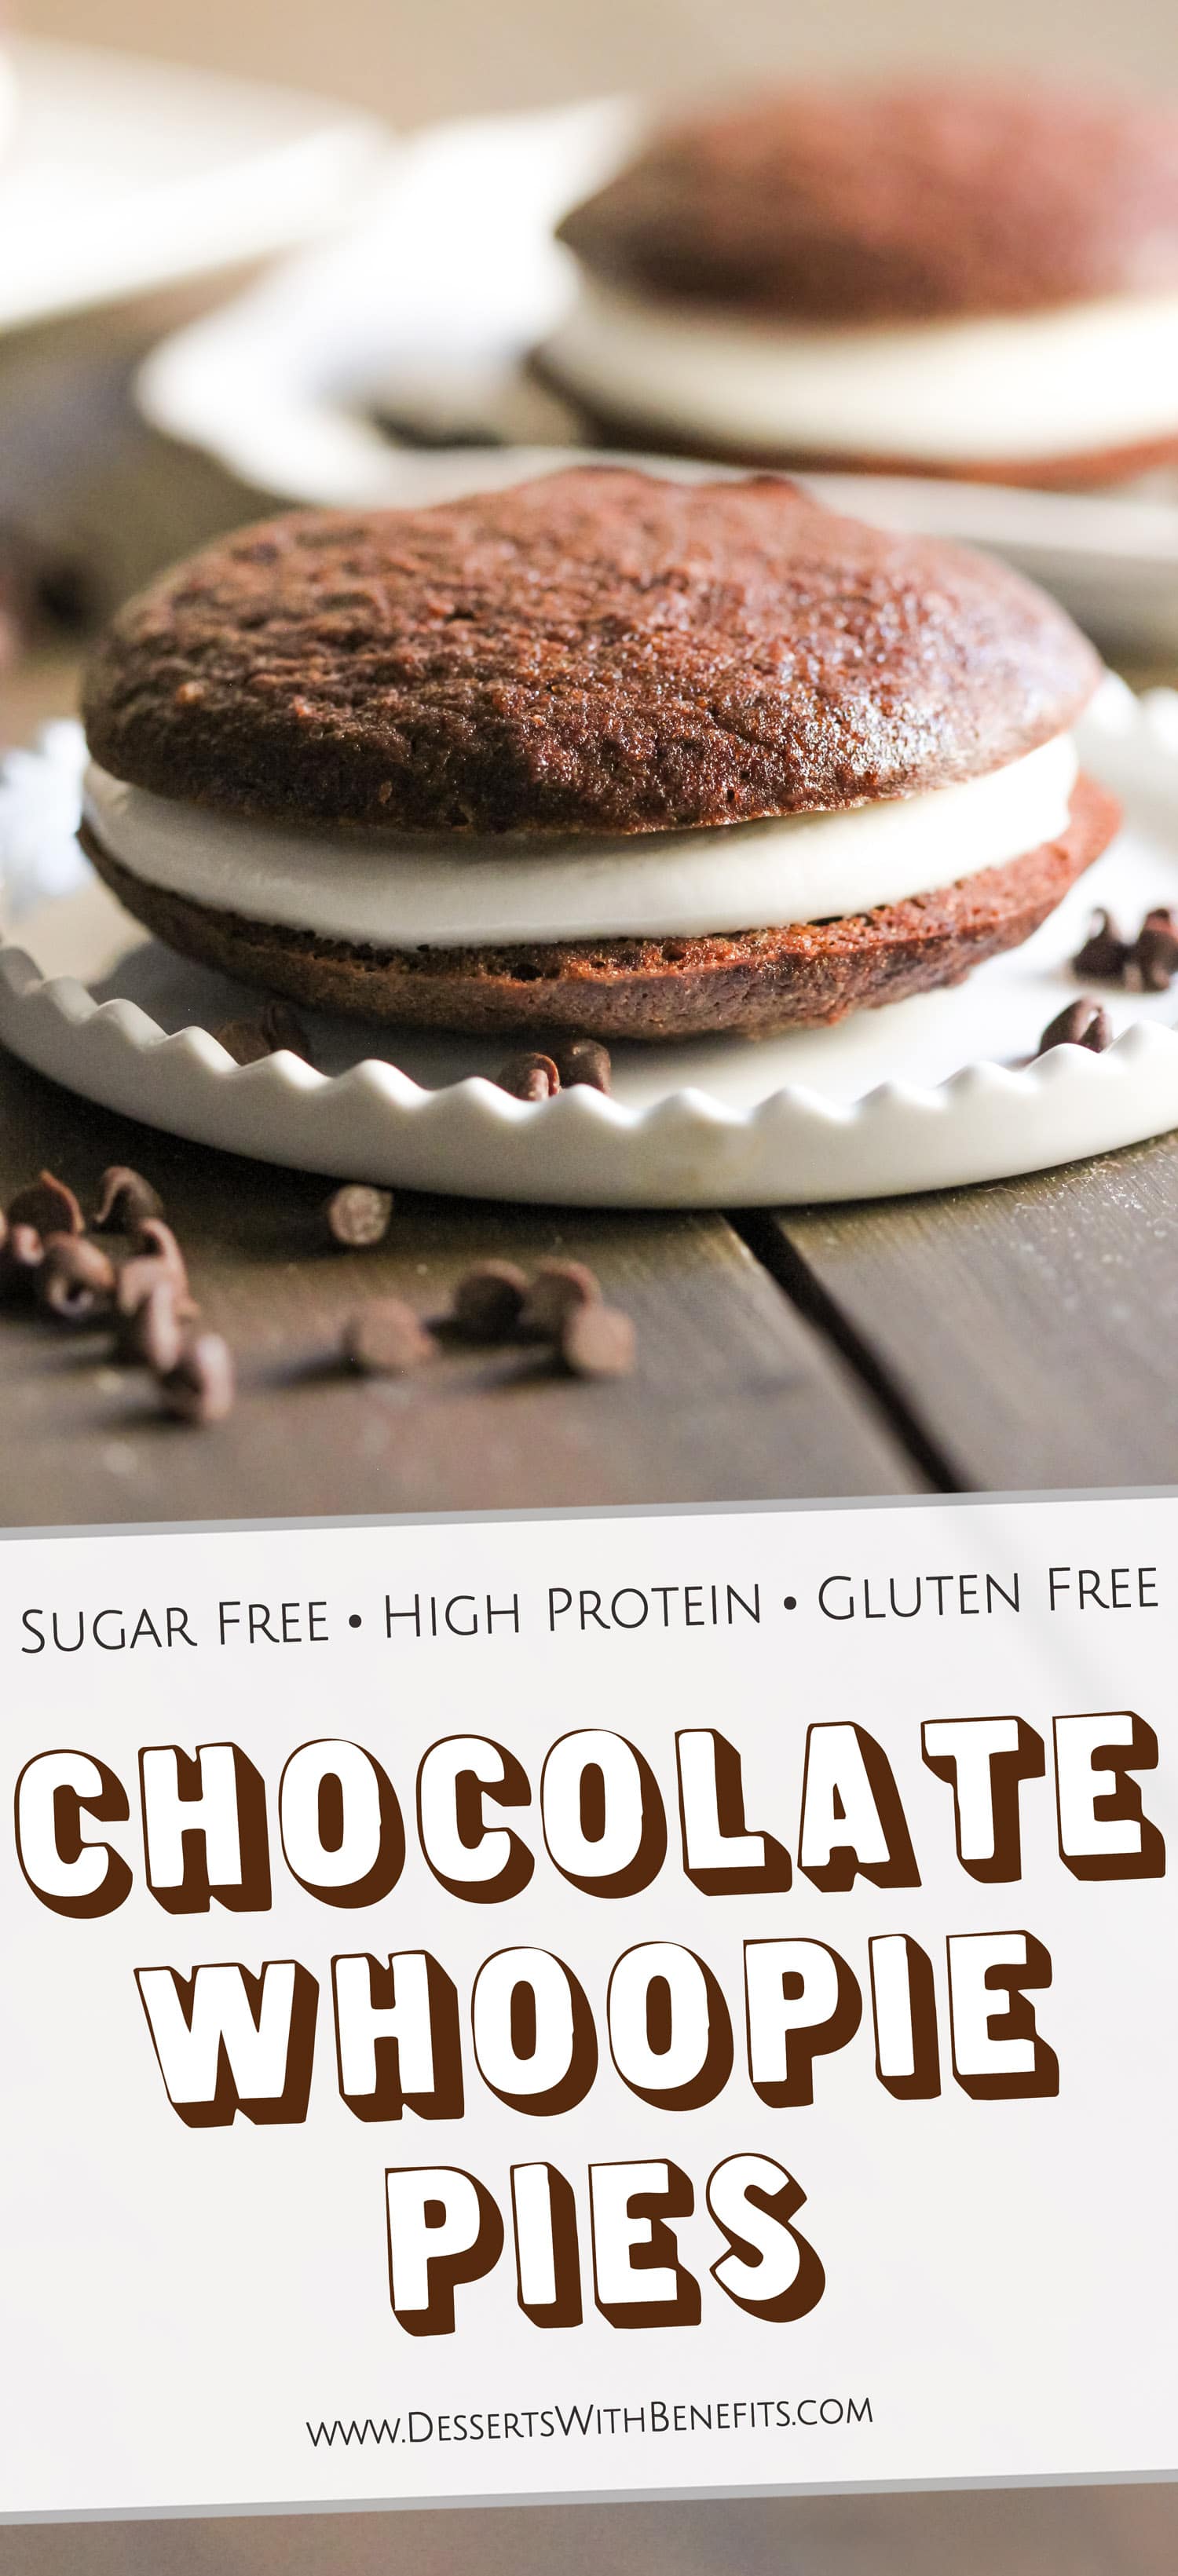 These Healthy Chocolate Whoopie Pies are so soft, light, and fluffy (like a hybrid between a cake and cookie), that you'd never ever know they're sugar free, high protein, gluten free, and dairy free too! Healthy Dessert Recipes with sugar free, low fat, gluten free, and vegan options at the Desserts With Benefits Blog (www.DessertsWithBenefits.com)